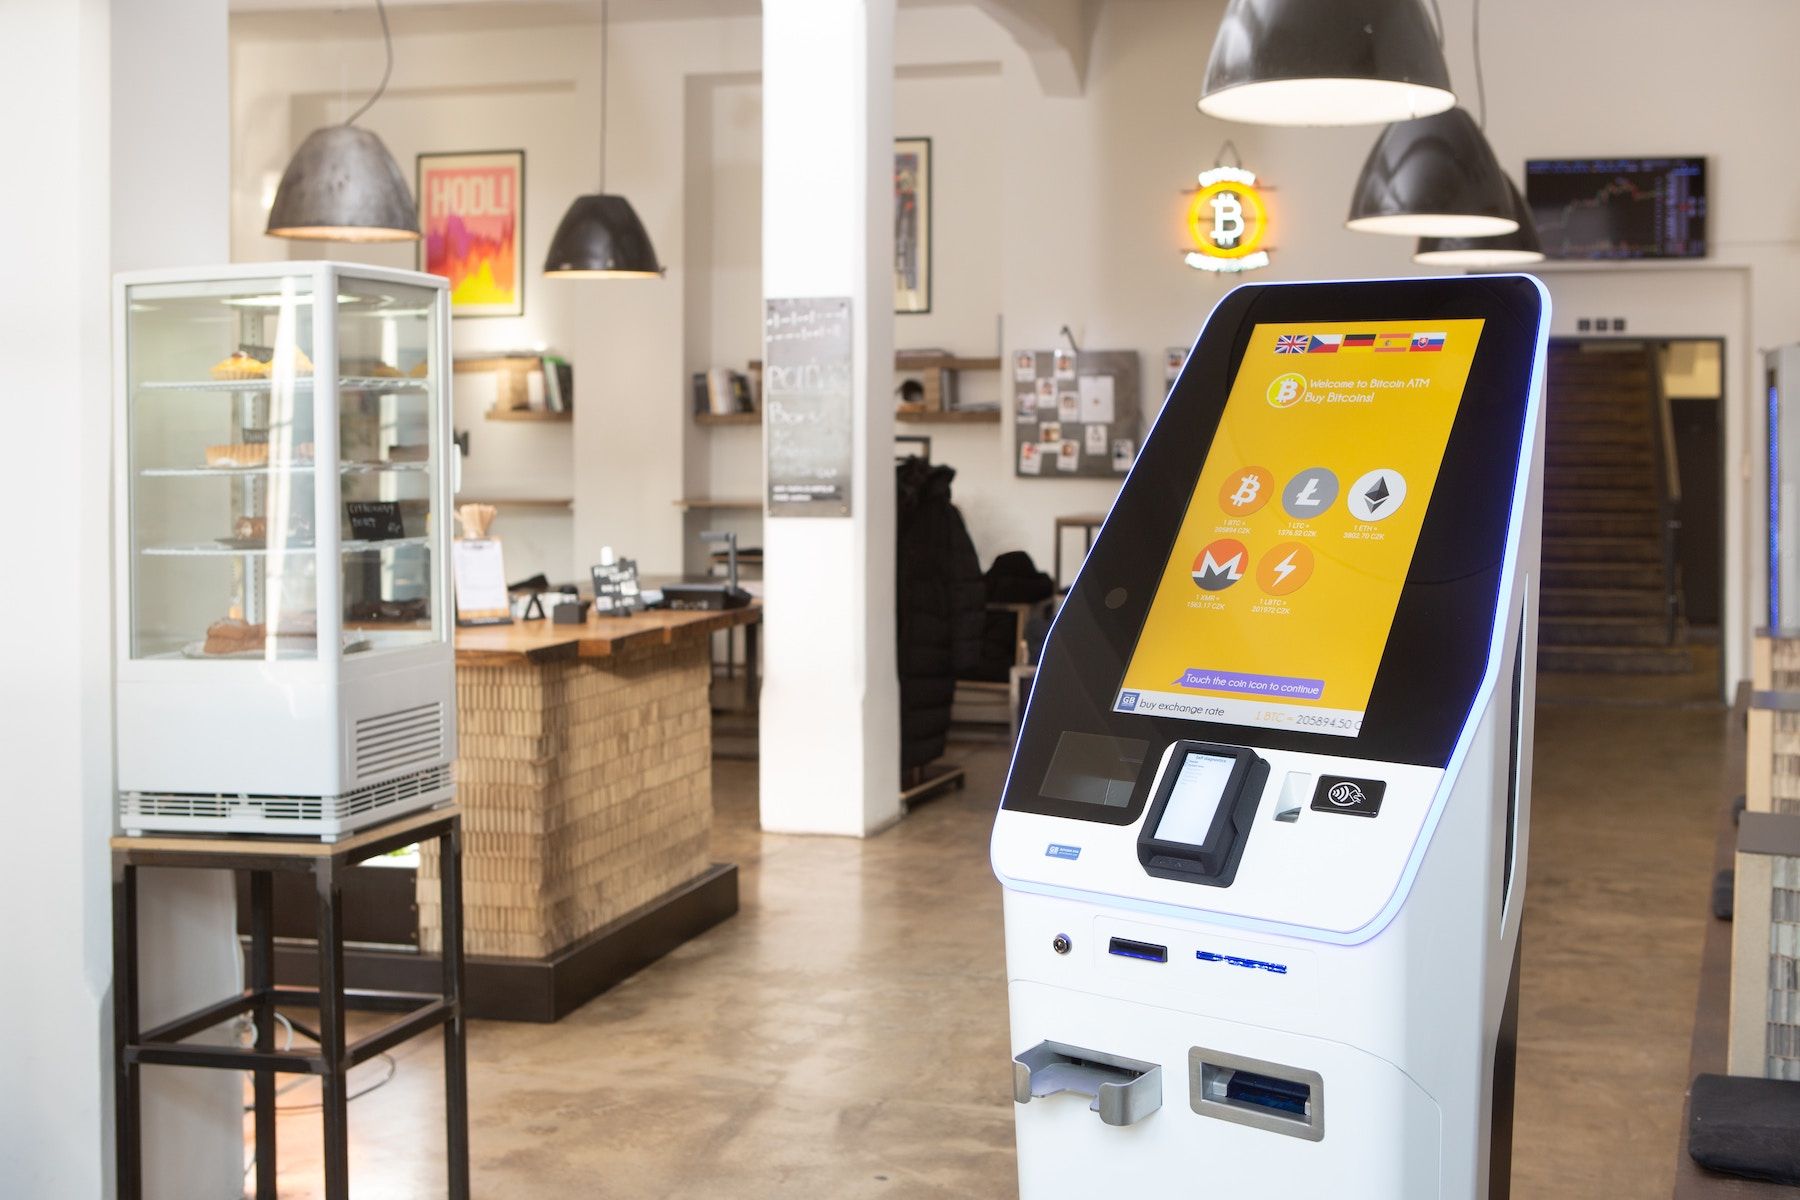 Bitcoin ATM offering various crypto withdrawals